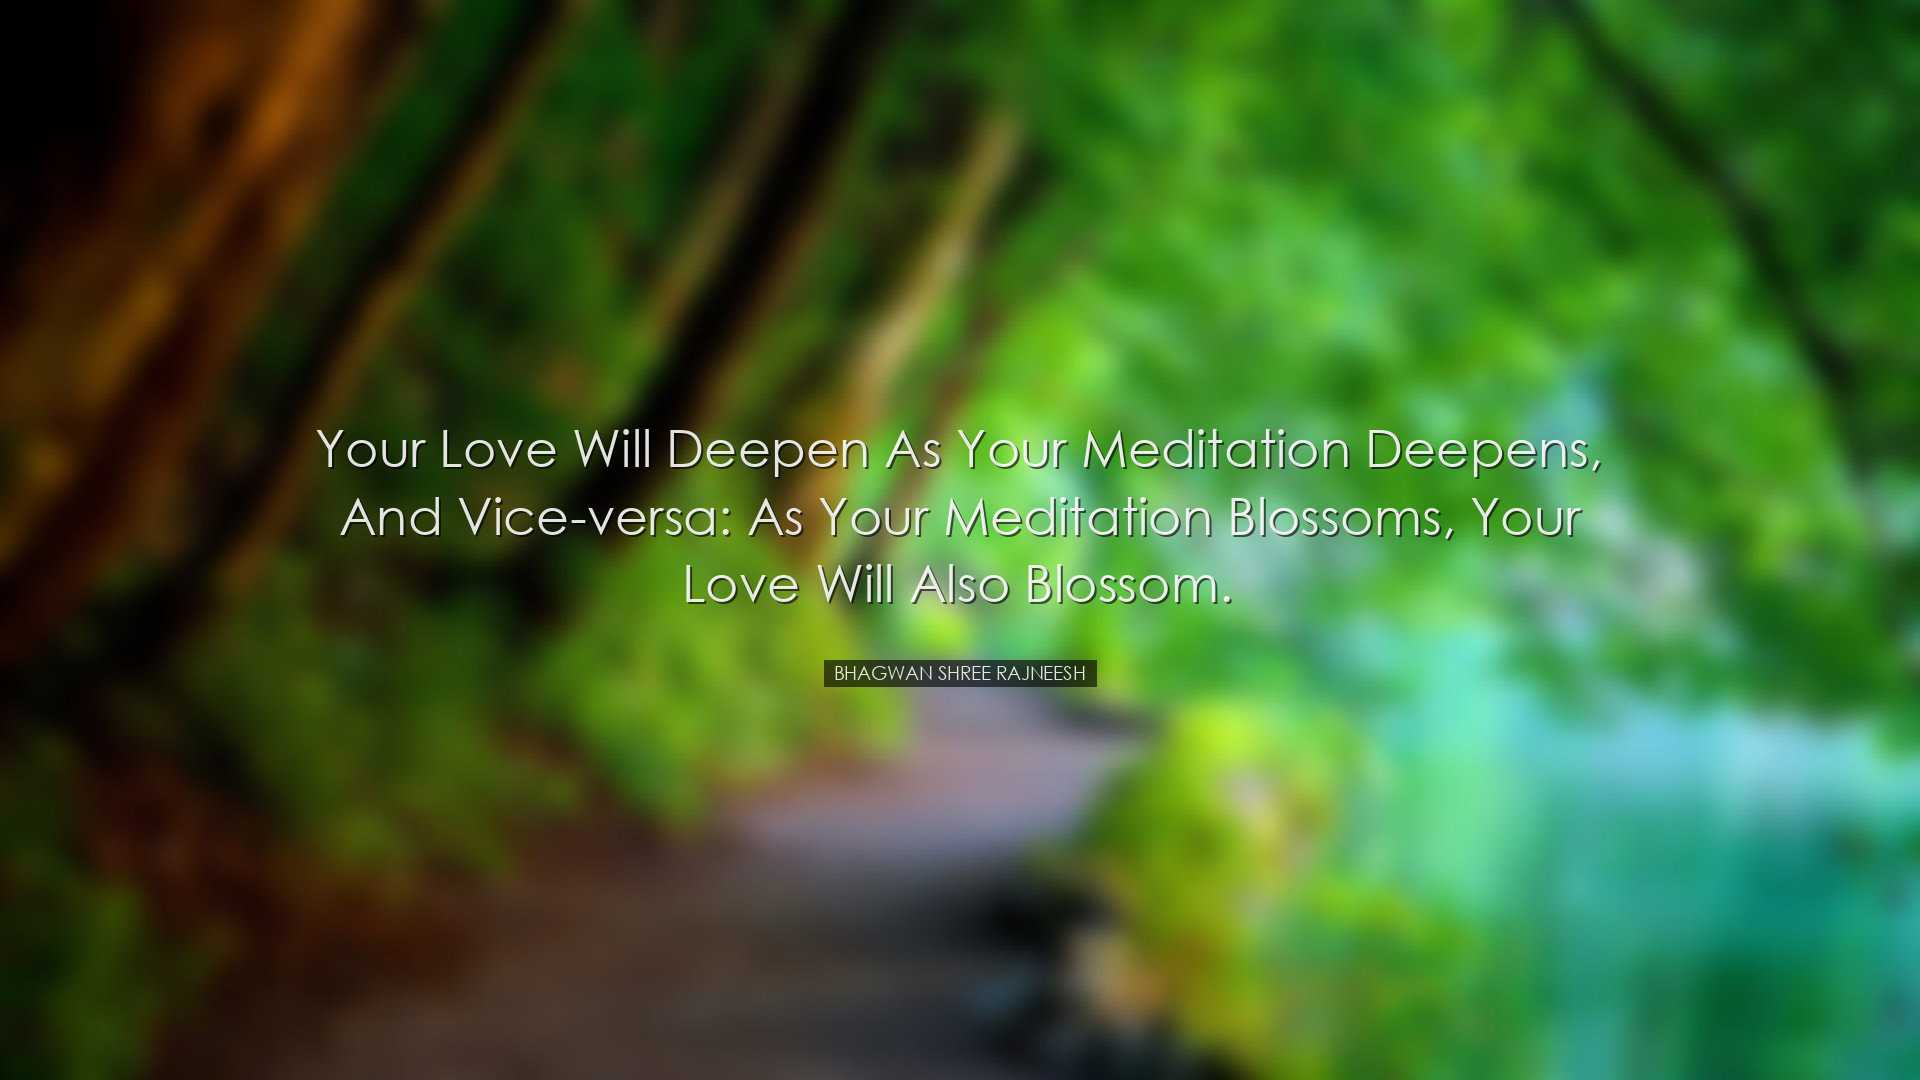 Your love will deepen as your meditation deepens, and vice-versa: